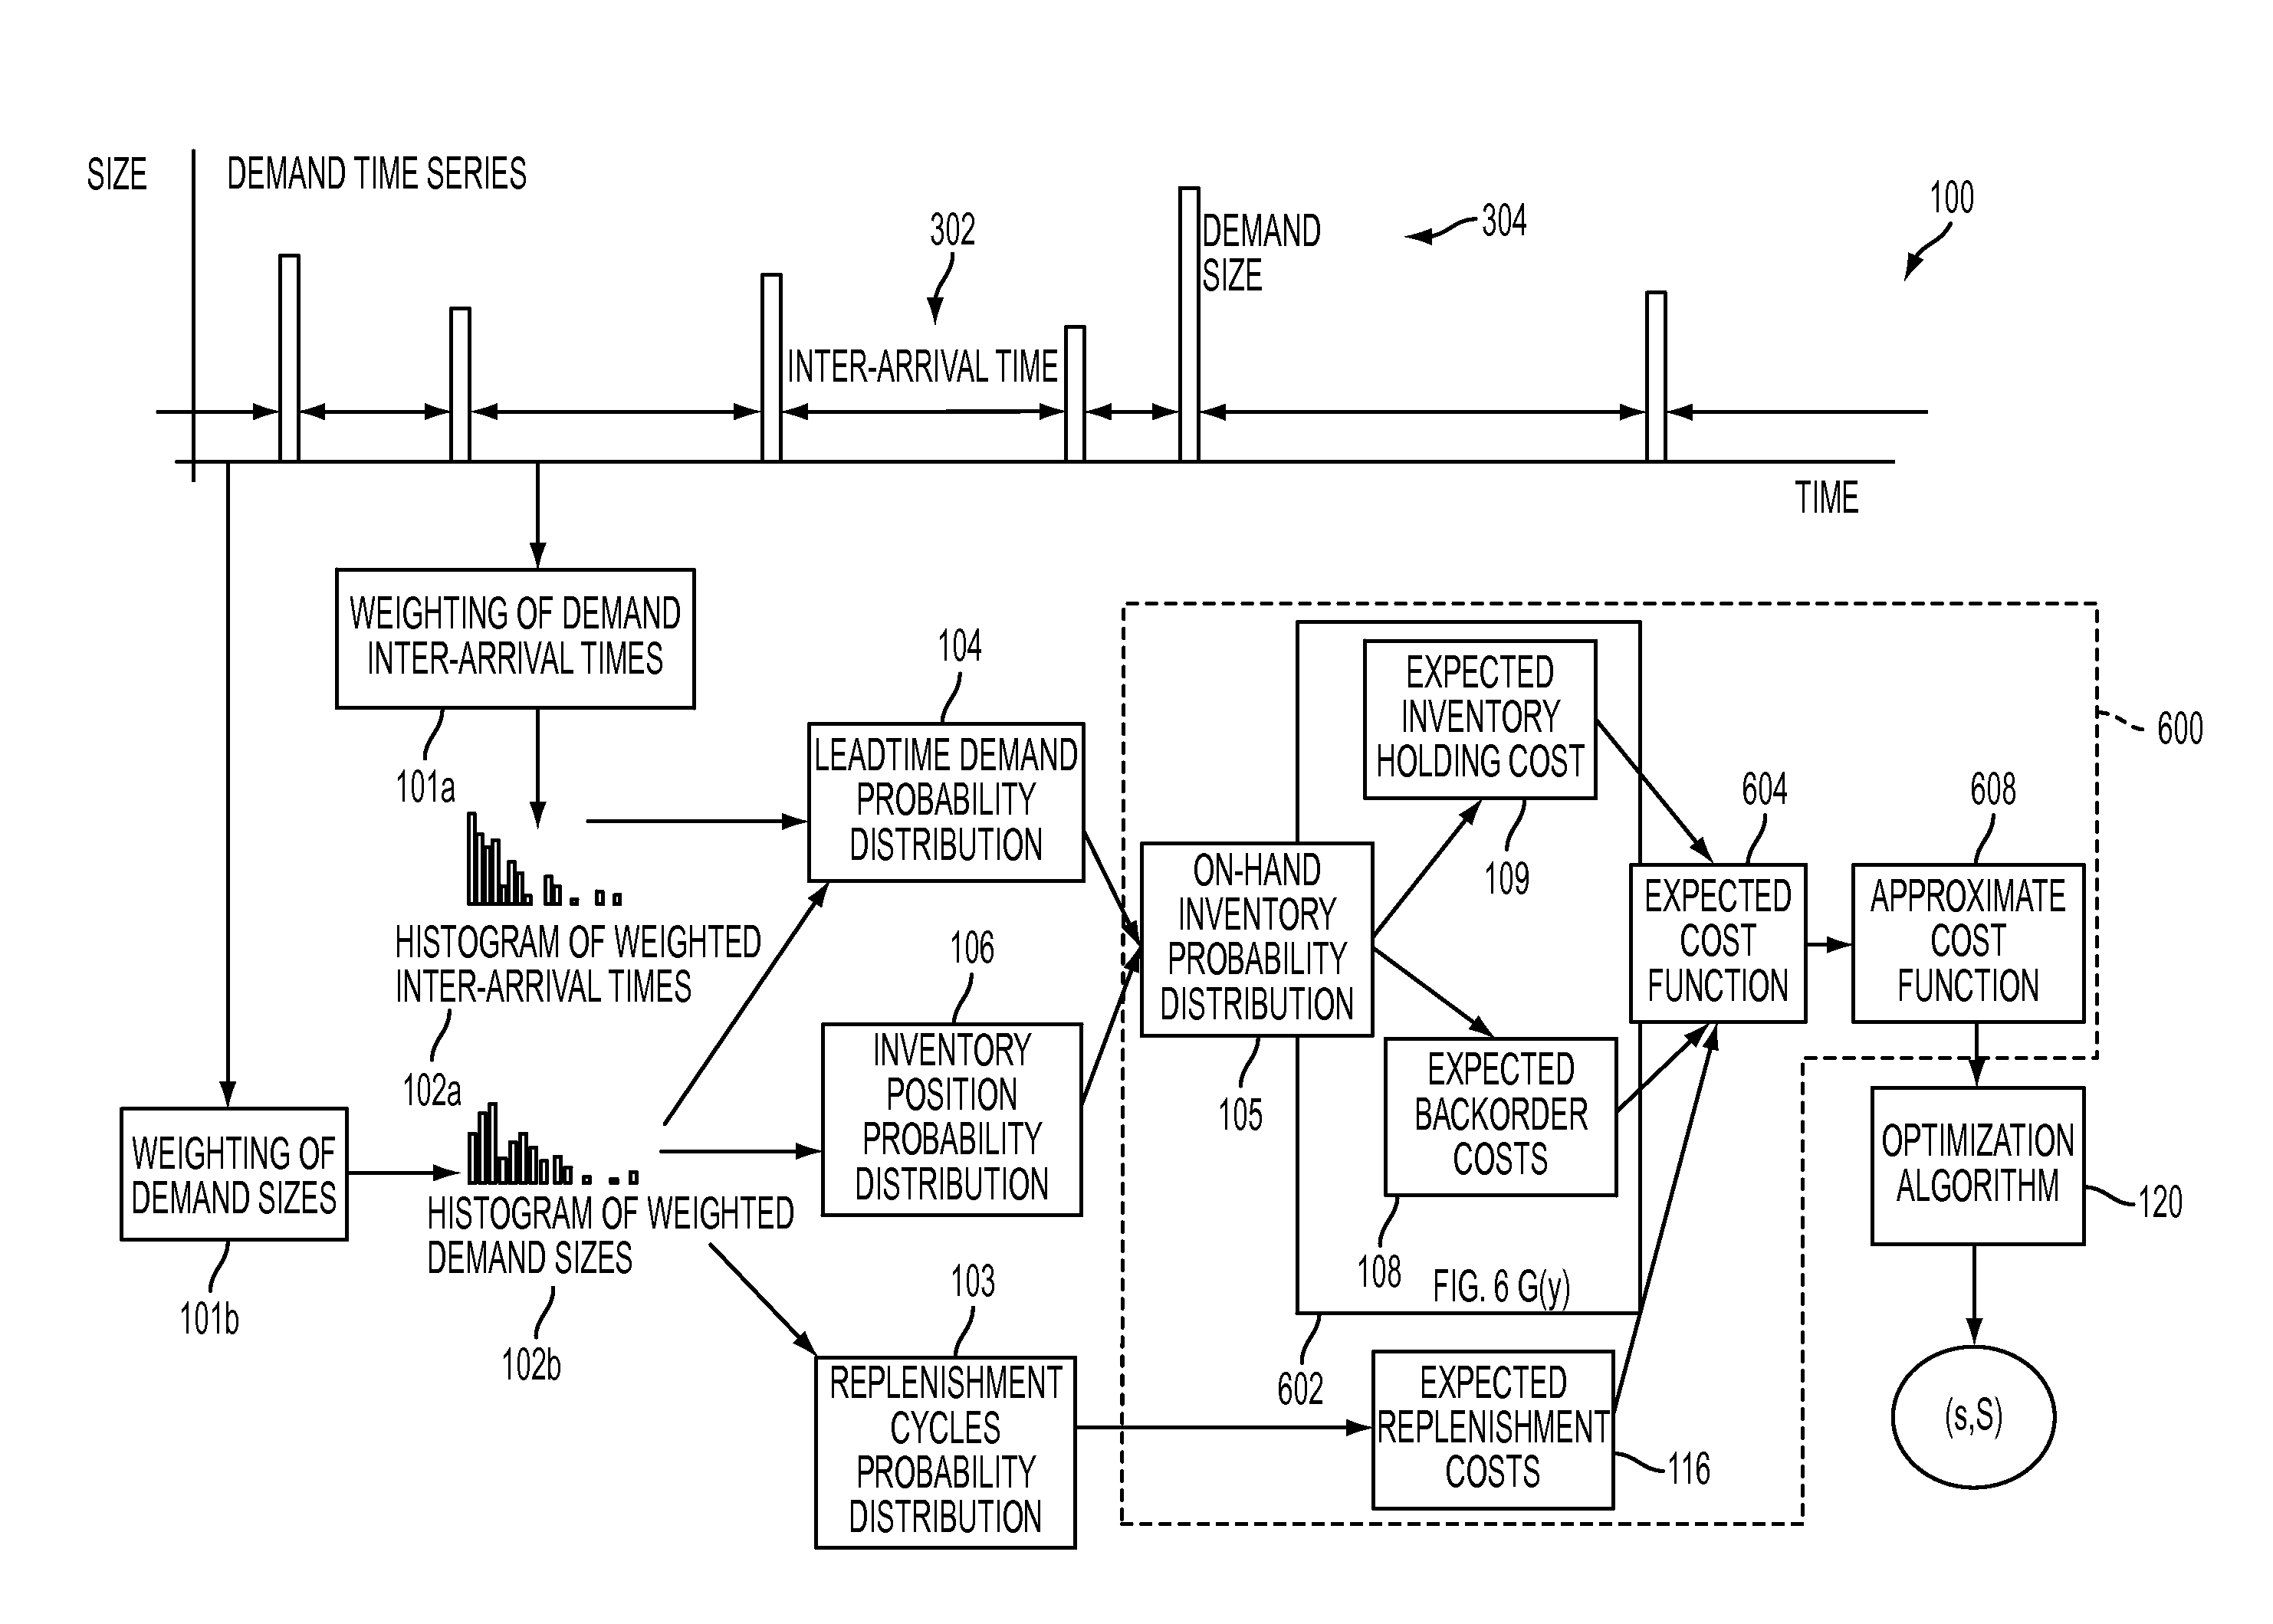 Method and computer system for settng inventory control levels from demand inter-arrival time, demand size statistics